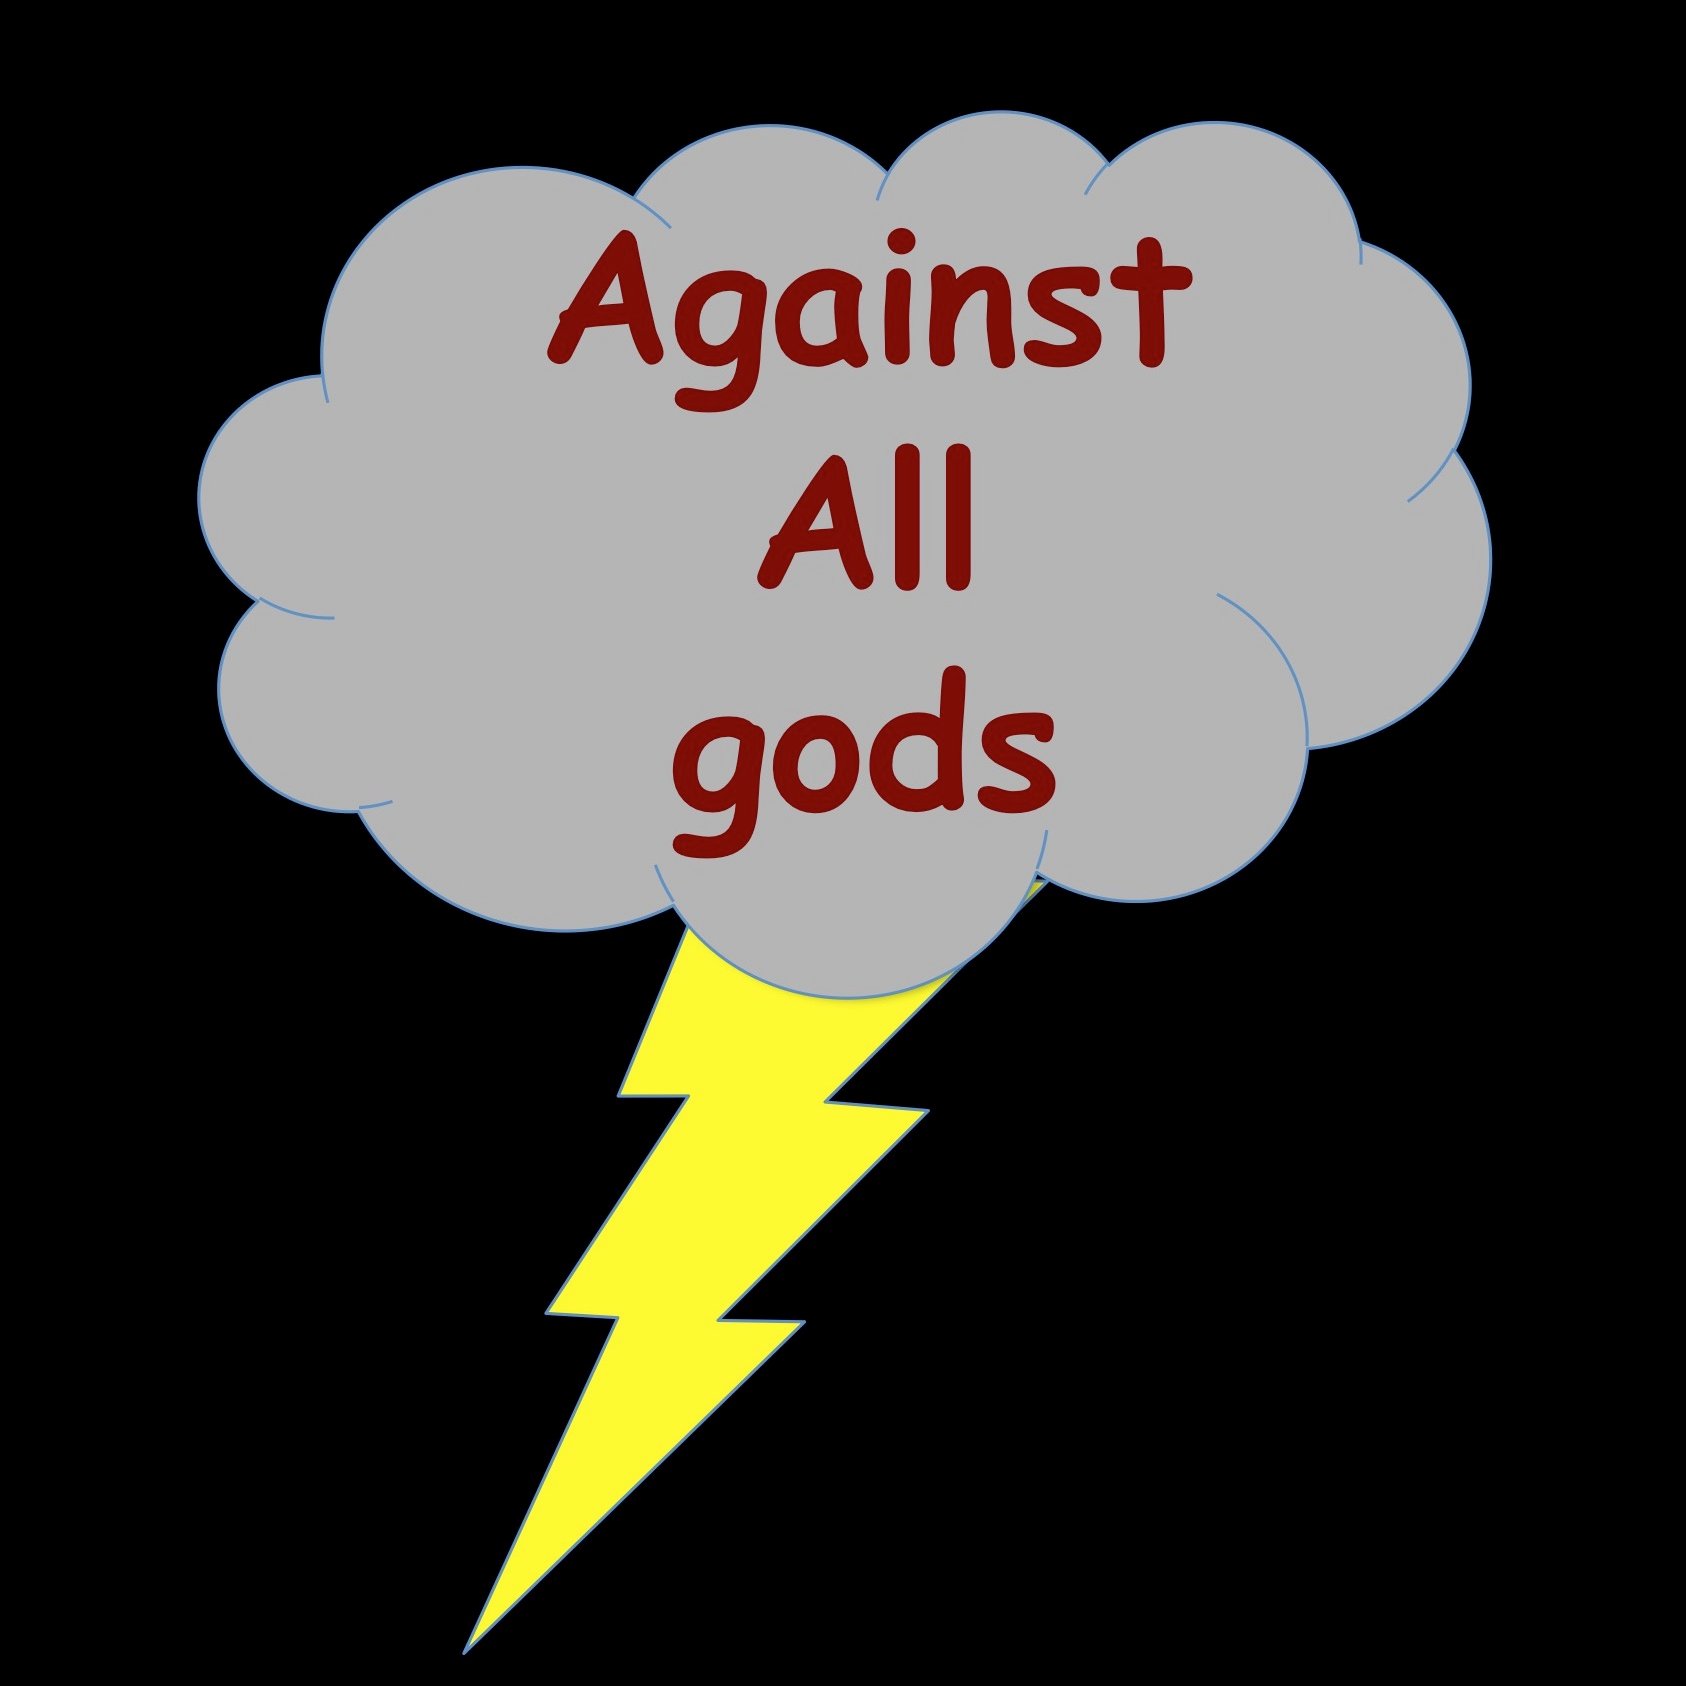 Ordained atheist!  Poking fun and serious criticism at religions and the gods men have created. Check out my website/blog at: https://t.co/su4e8GiE8P